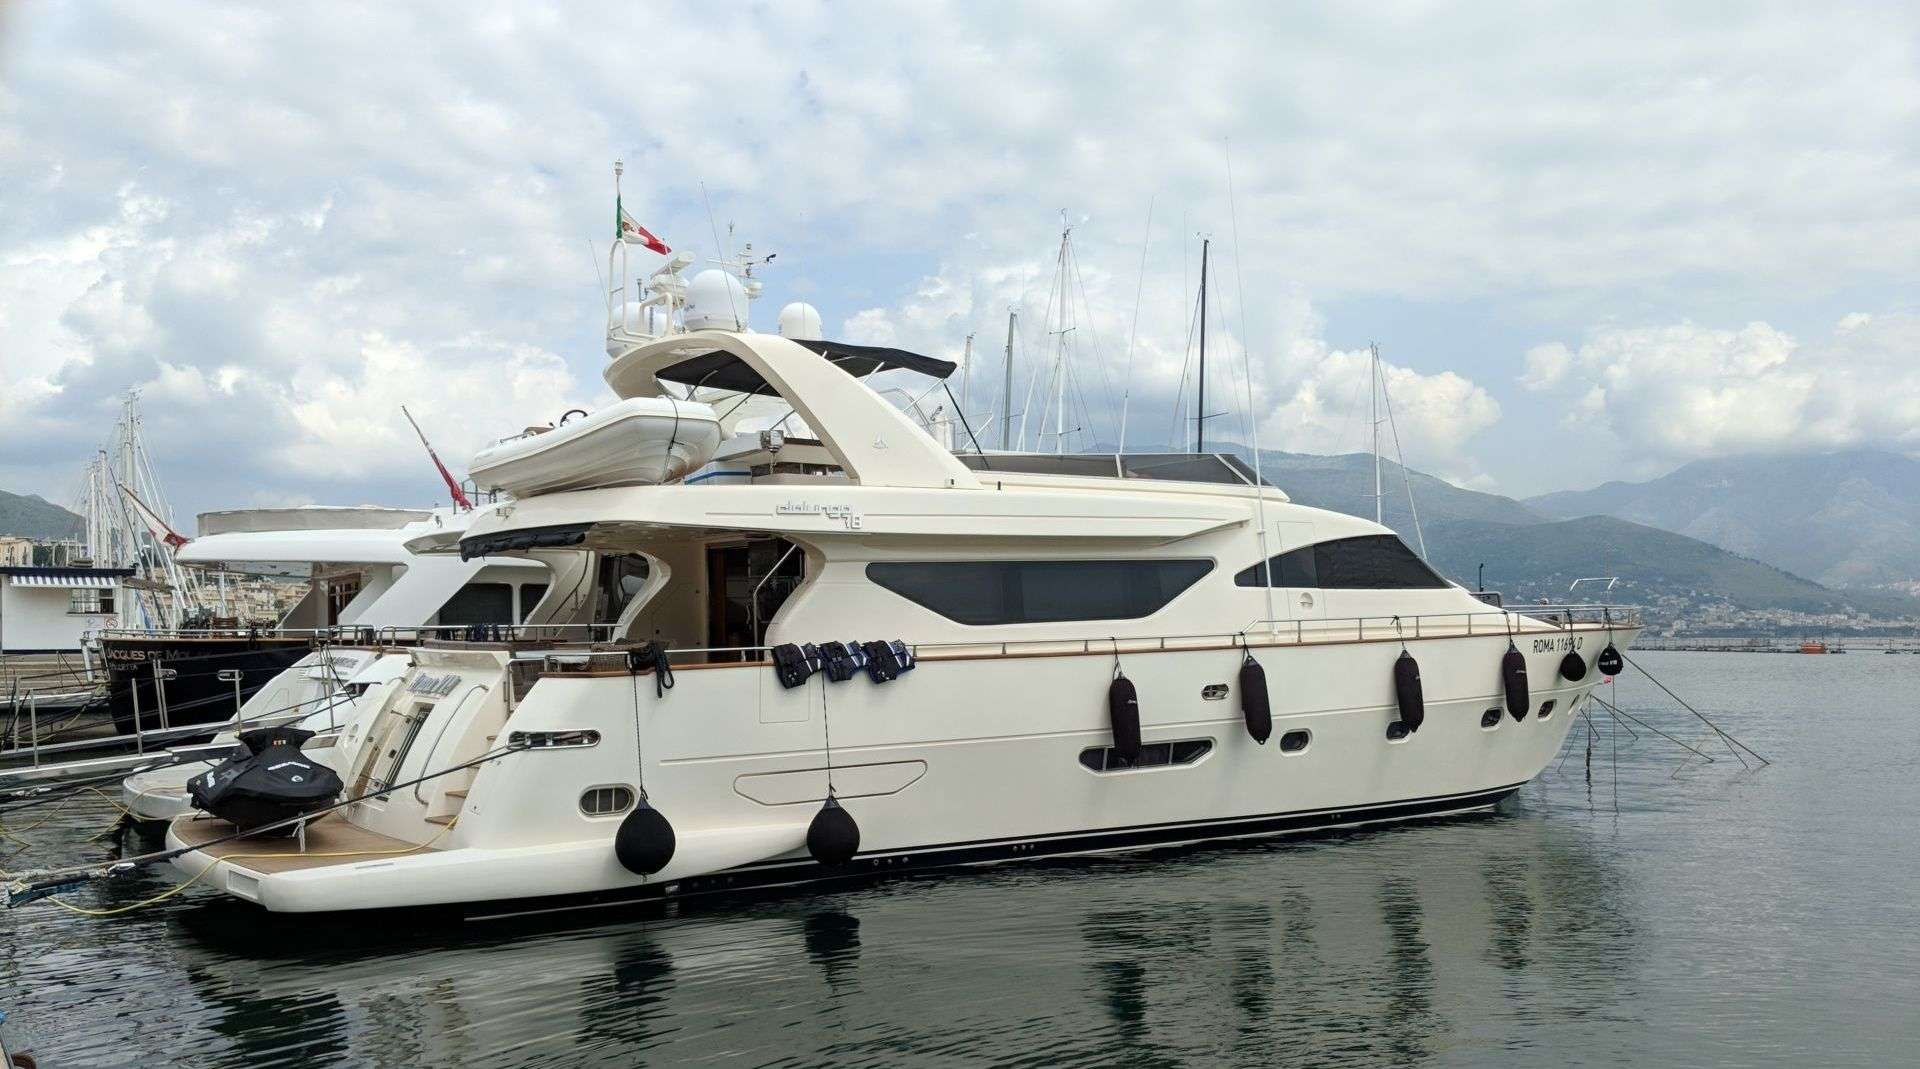 ARMA VII Yacht Charter - Ritzy Charters